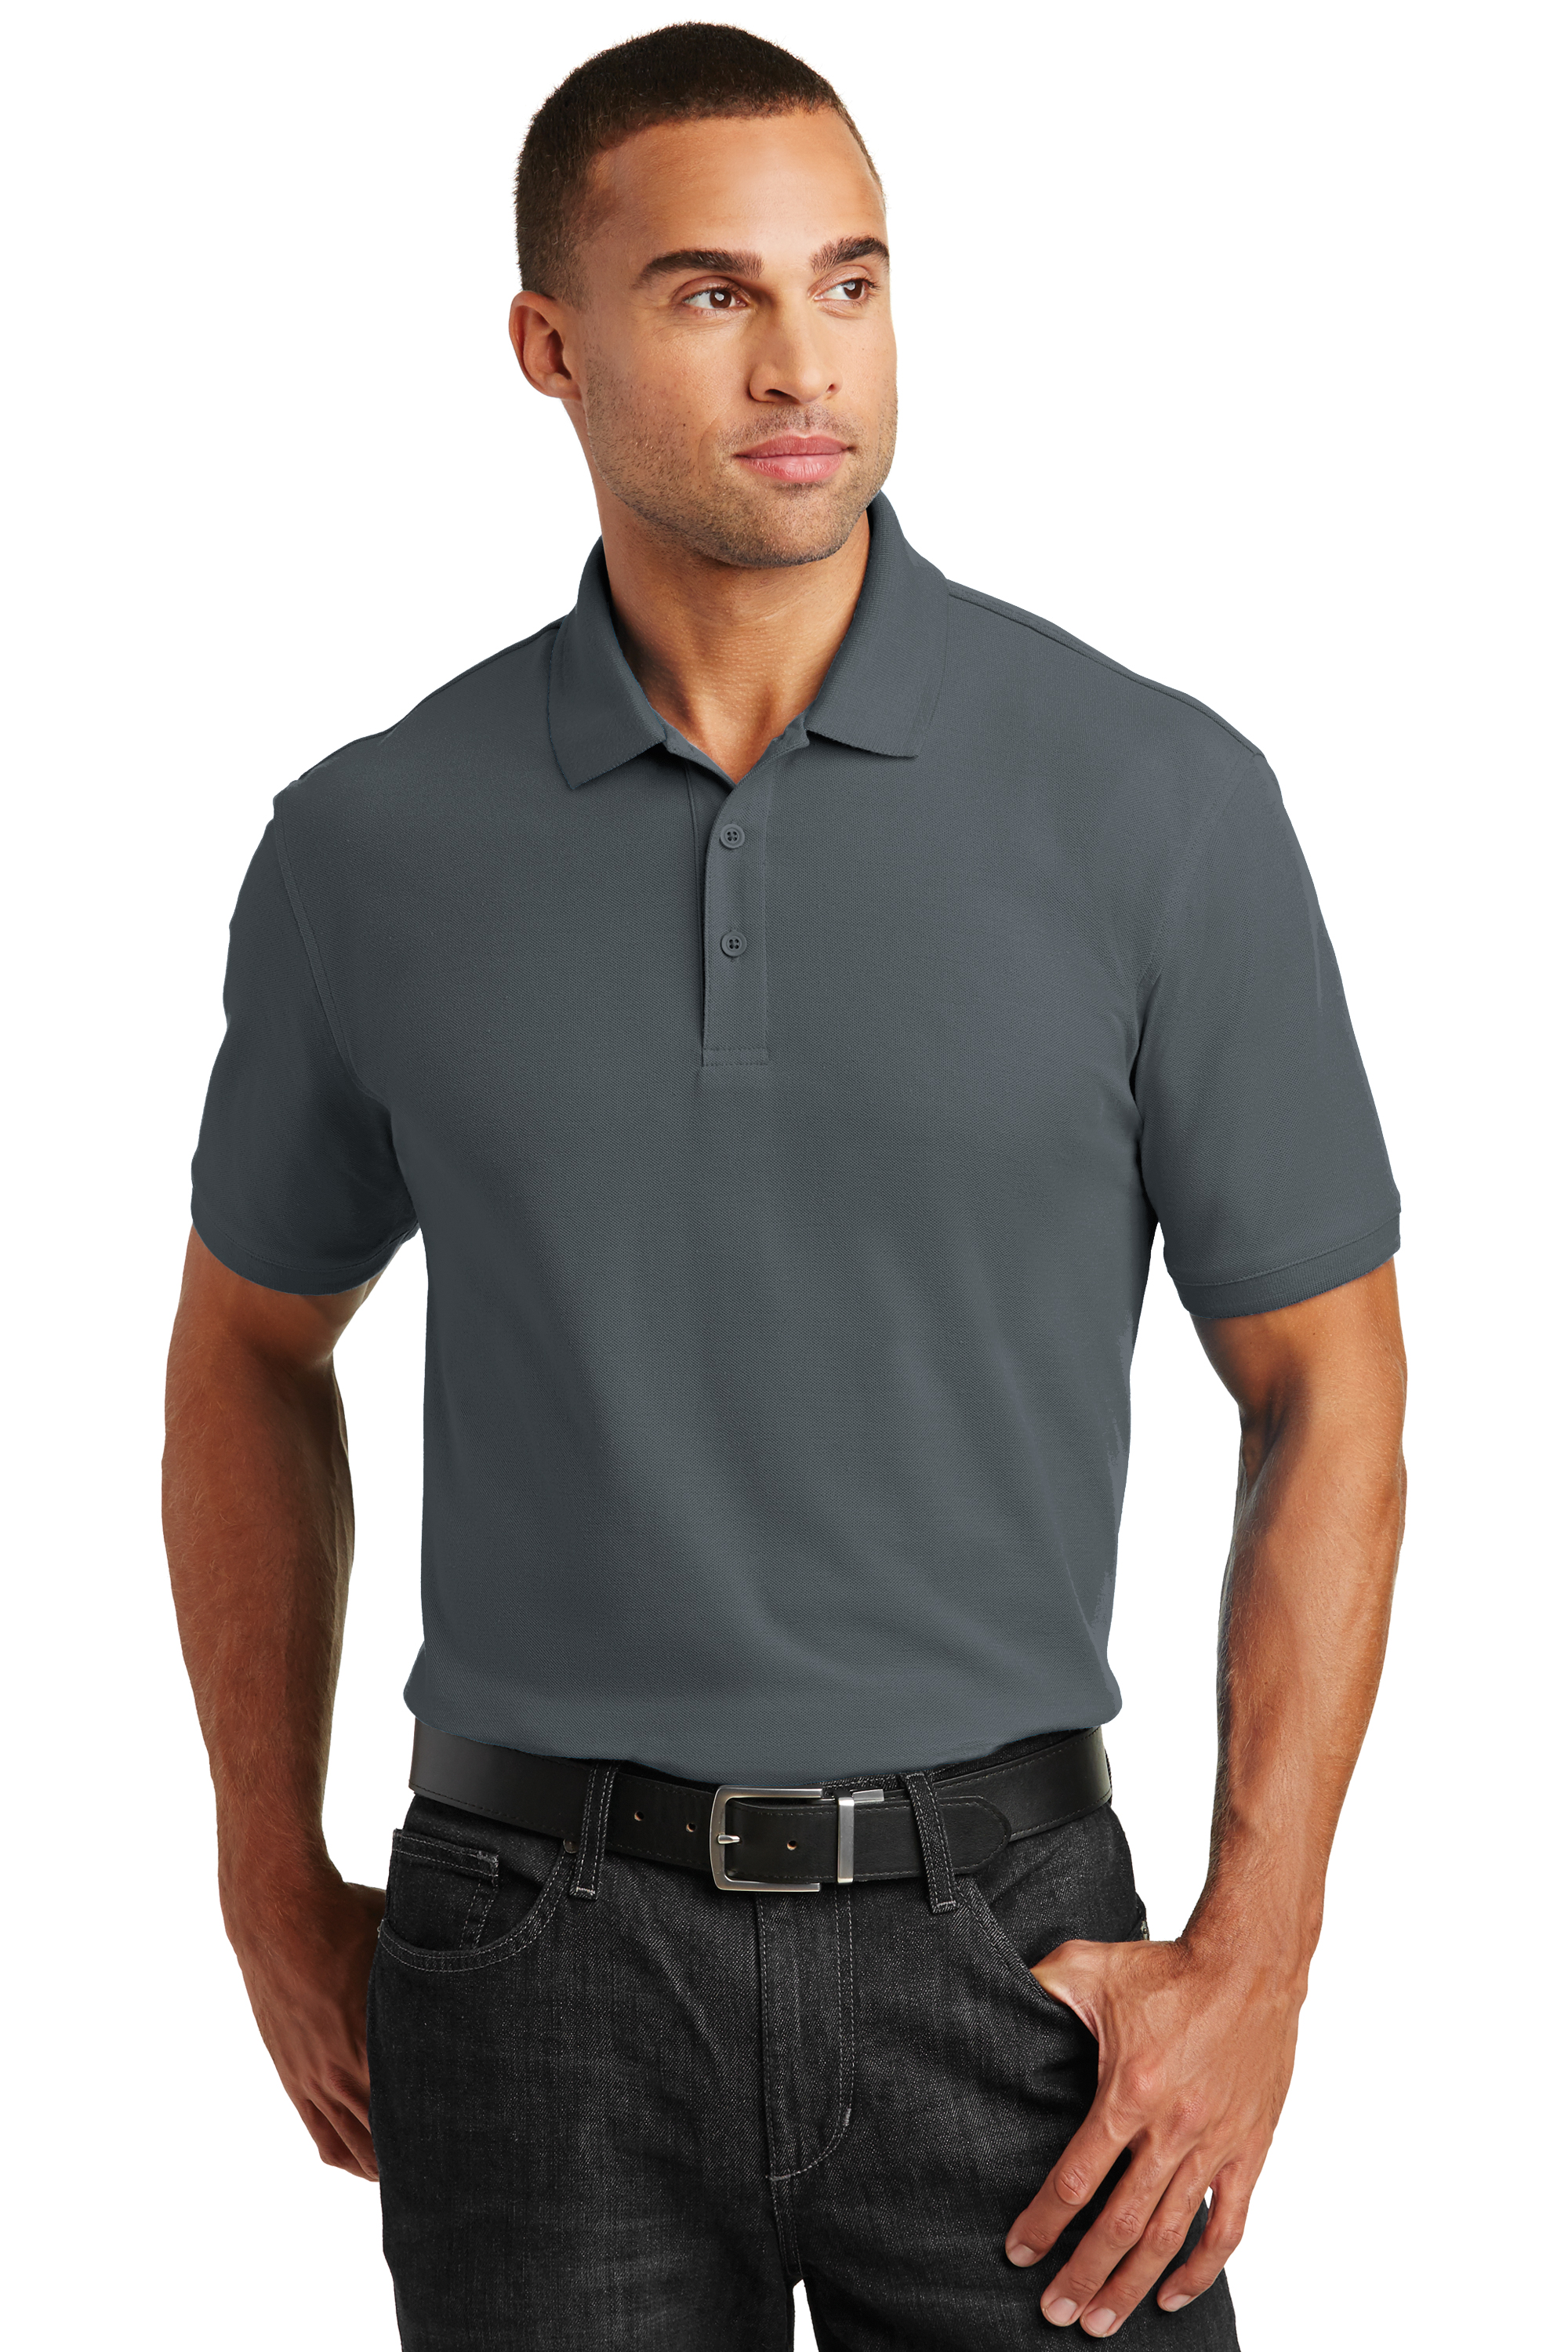 Details about   R/T Style Custom Embroidered Black/Grey Polo You Choose Size